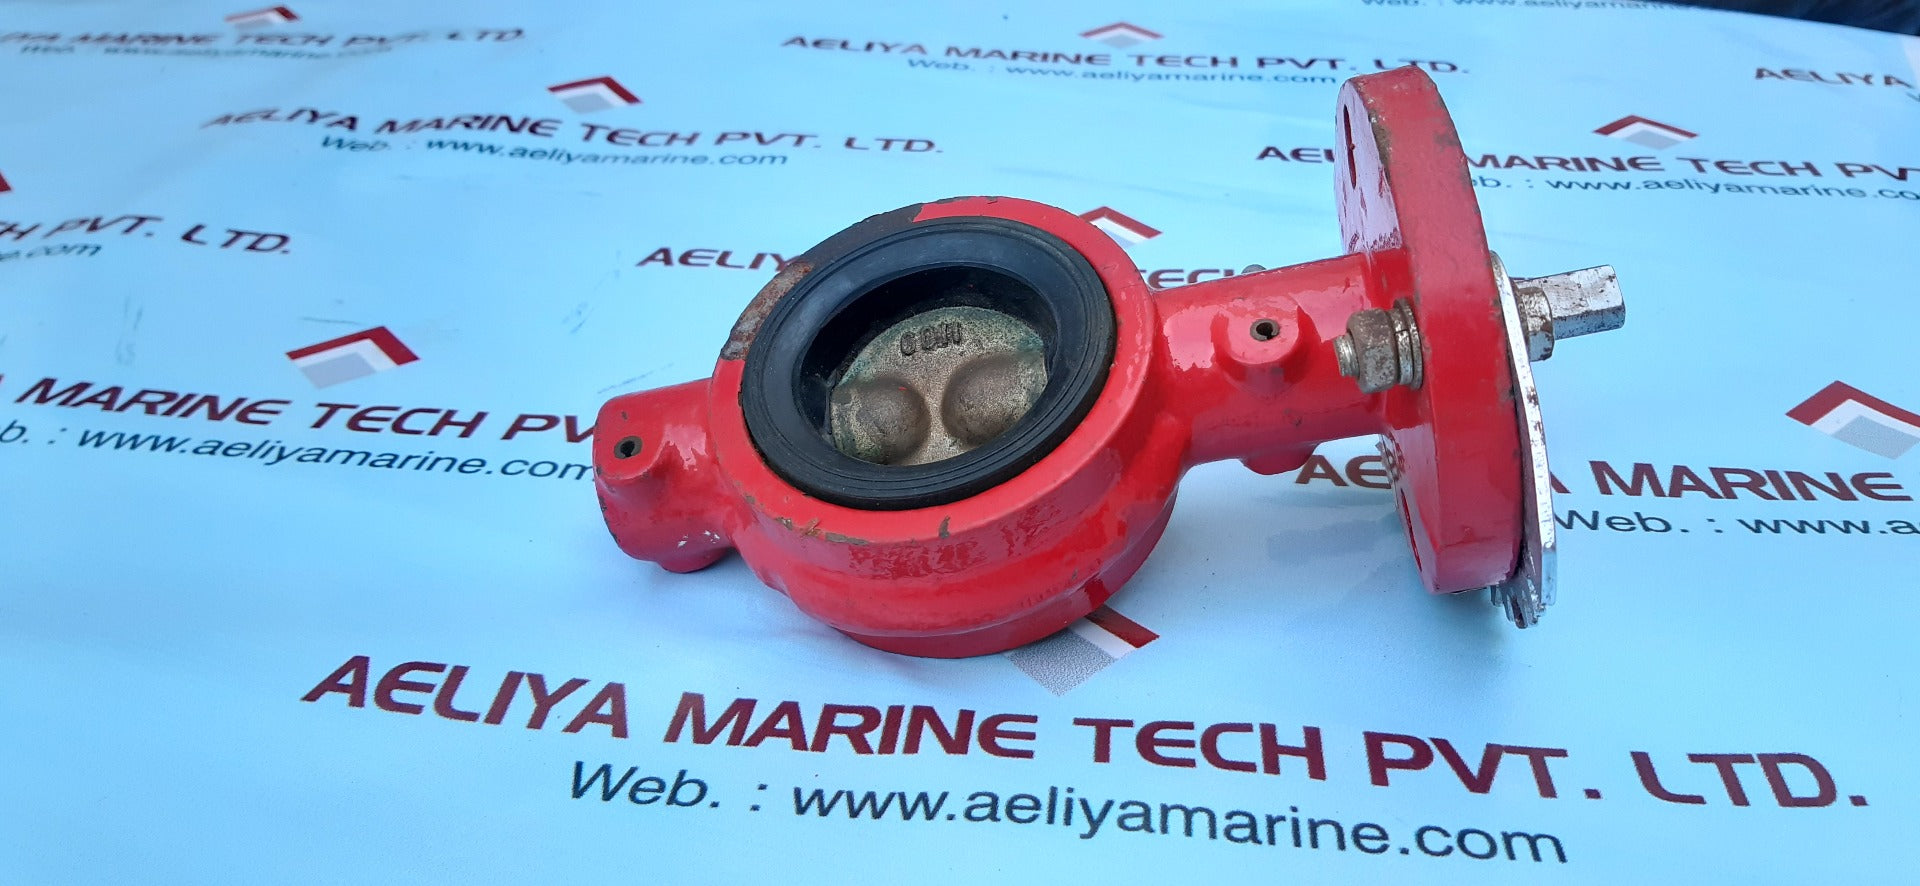 C&c industries series ln200 wafer style butterfly valve